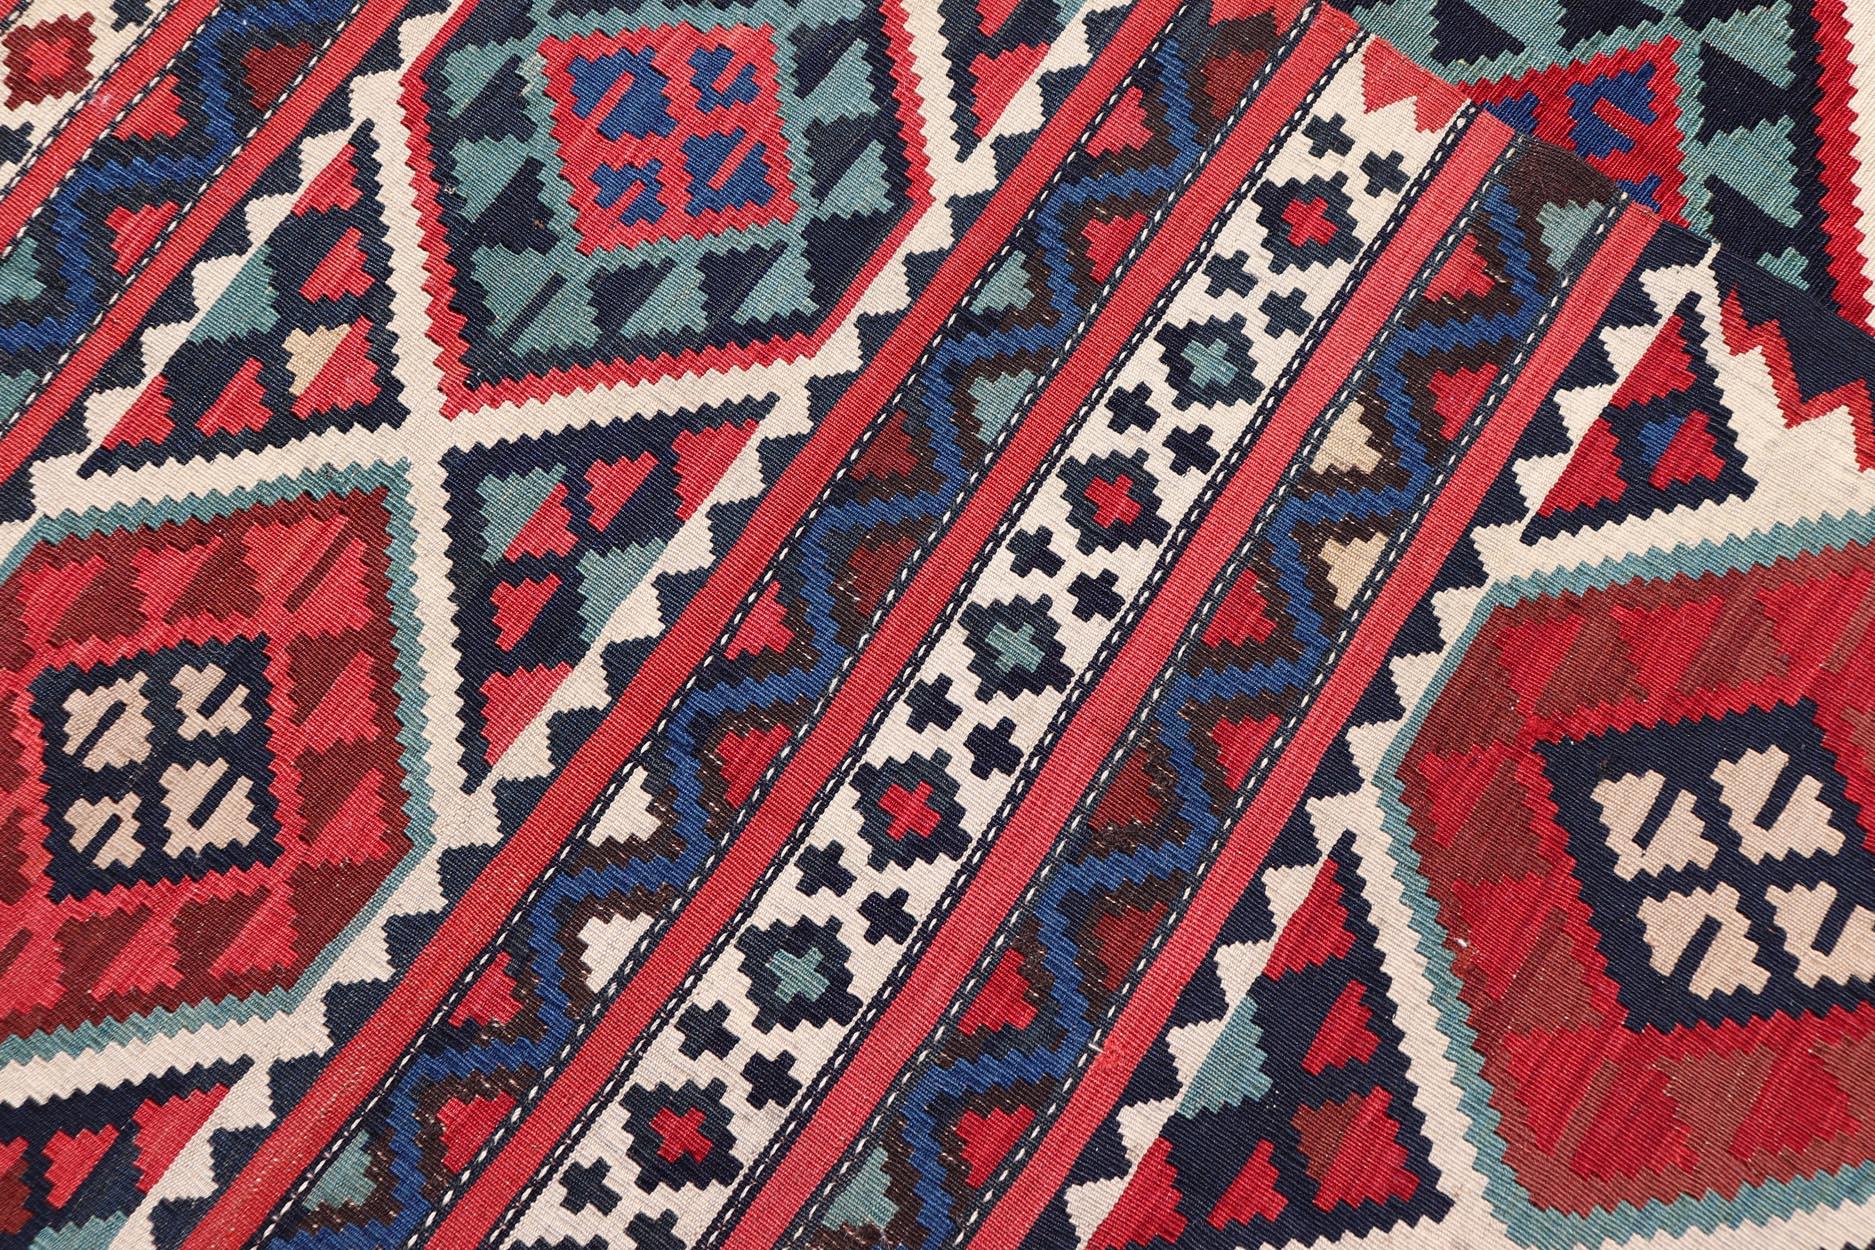 19th Century Antique Shirvan Kilim with Intricate Design in with Vibrant Colors For Sale 5